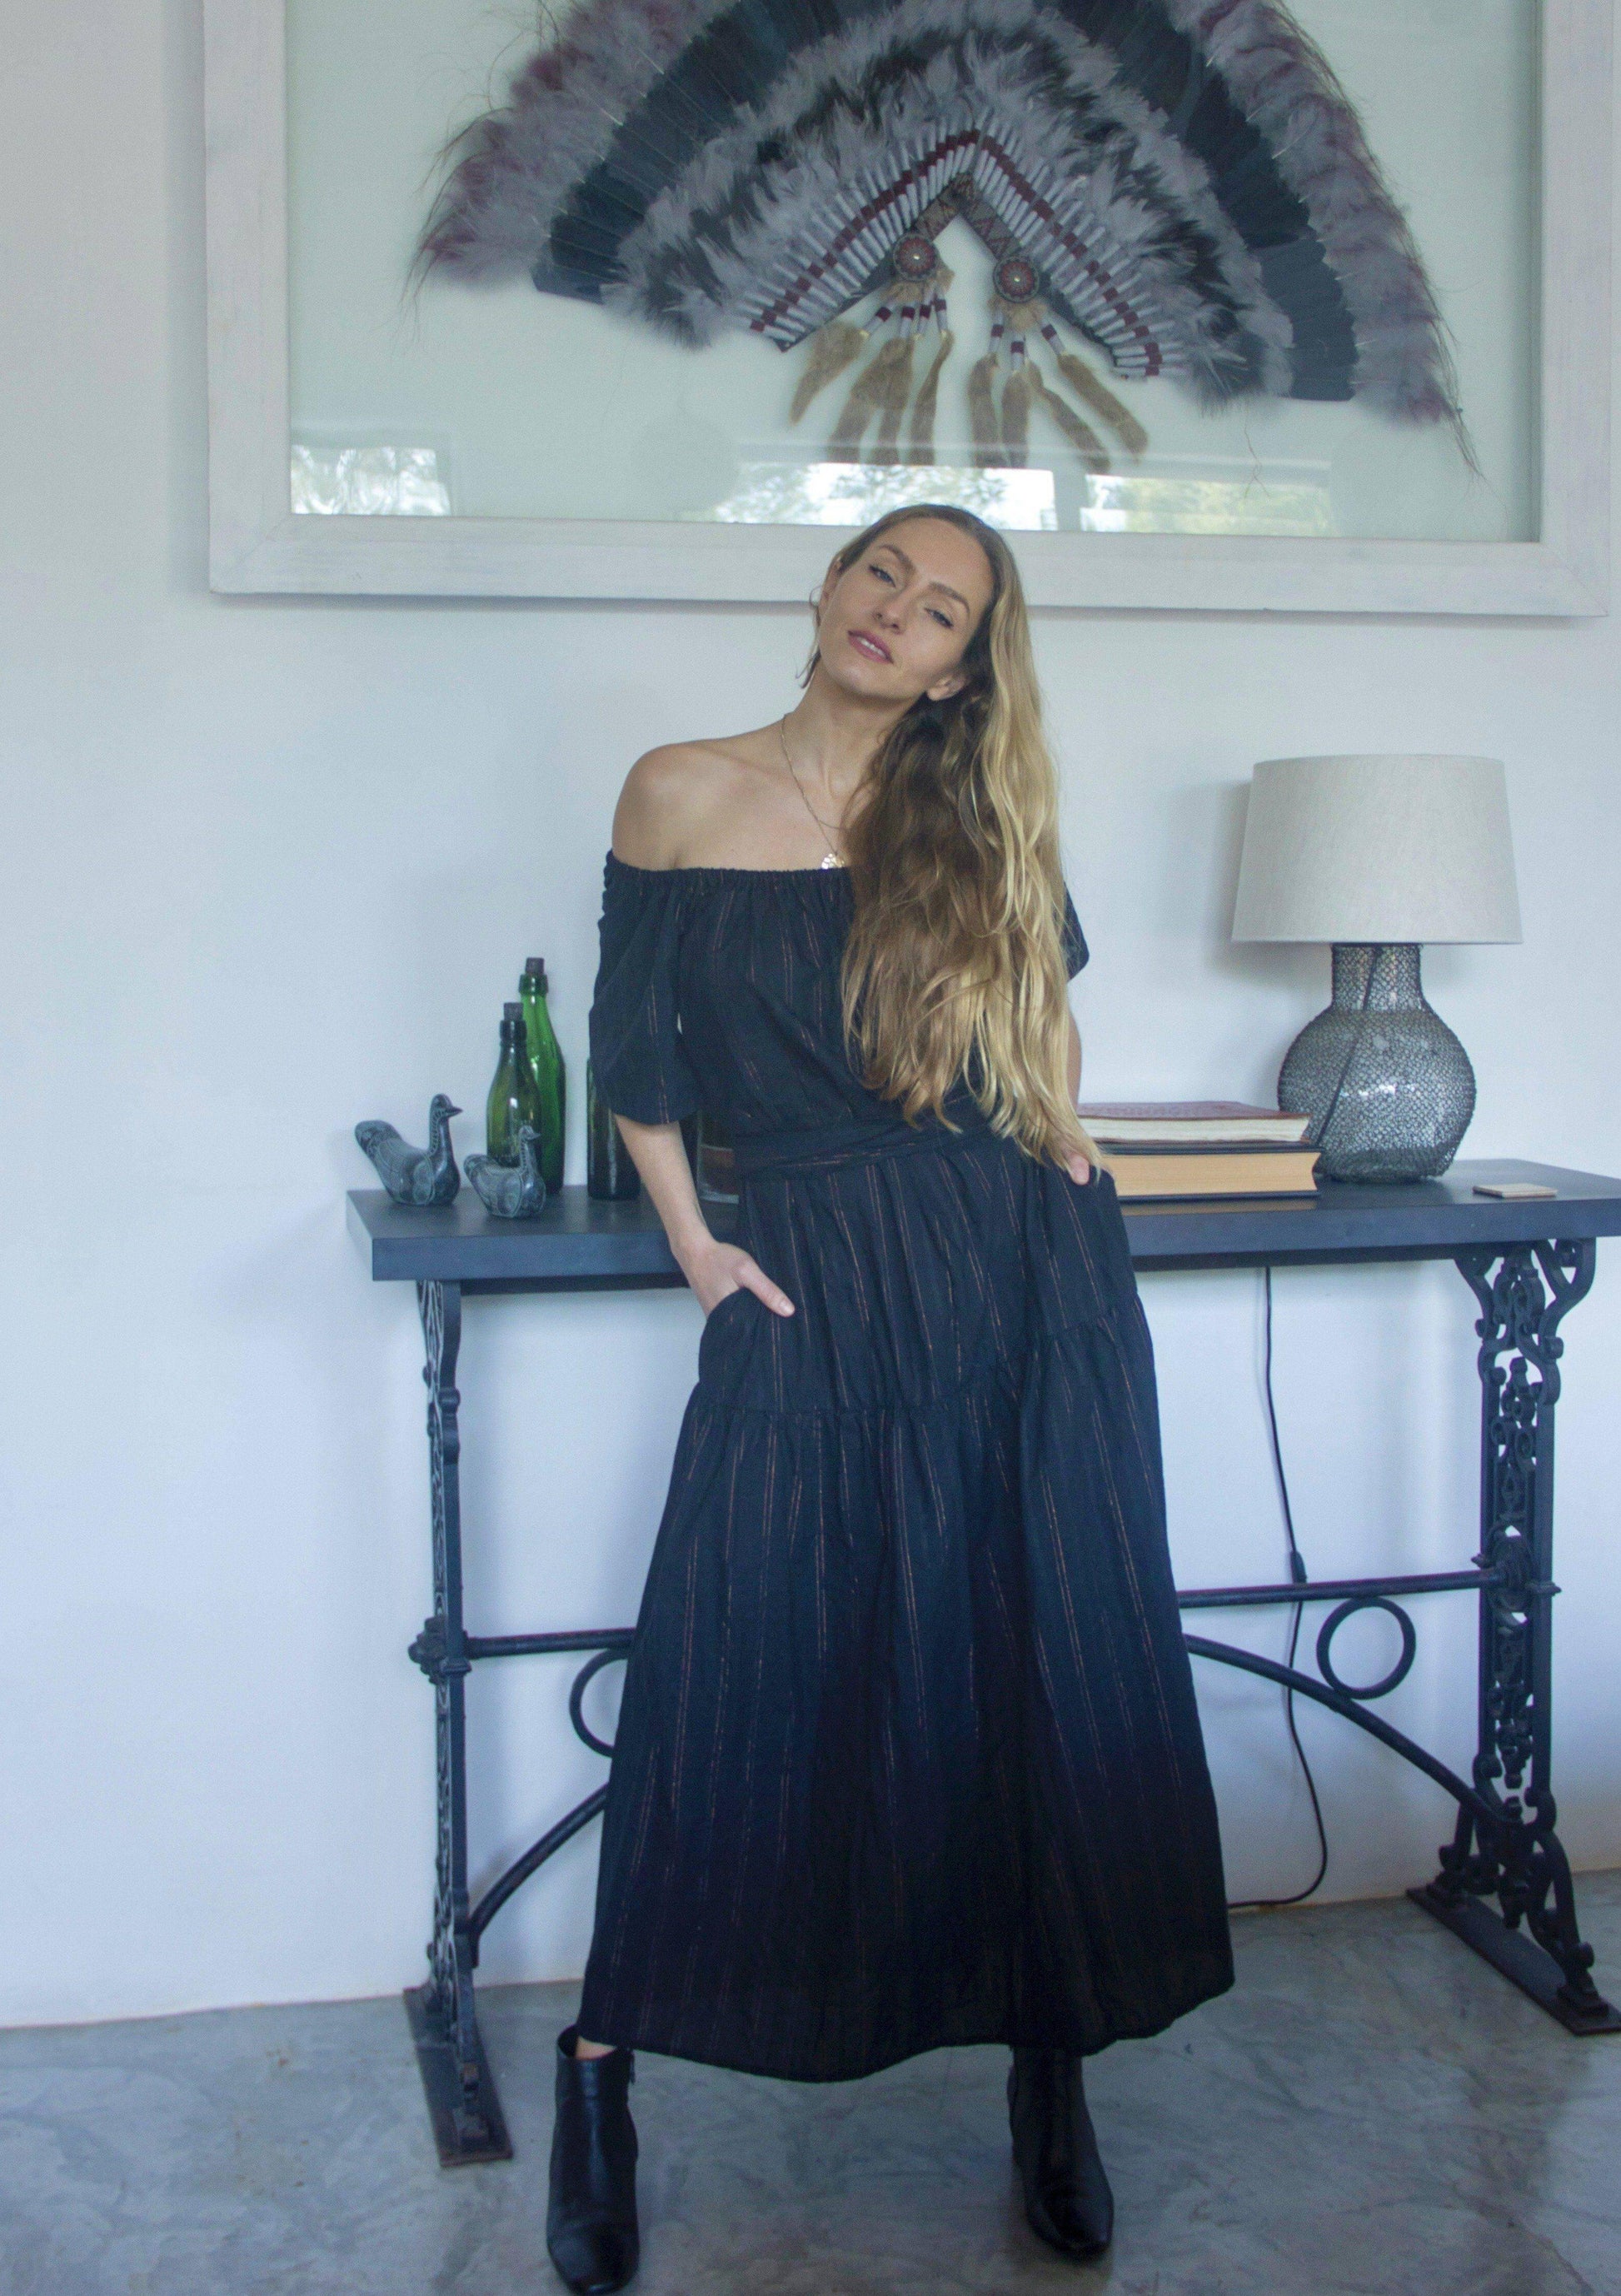 ADÈLE DRESS • Soft cotton maxi length dress featuring off-shoulder neckline, wrap-around belt, and side pockets in black with contrast fine copper fleck stripes. Available in one size.